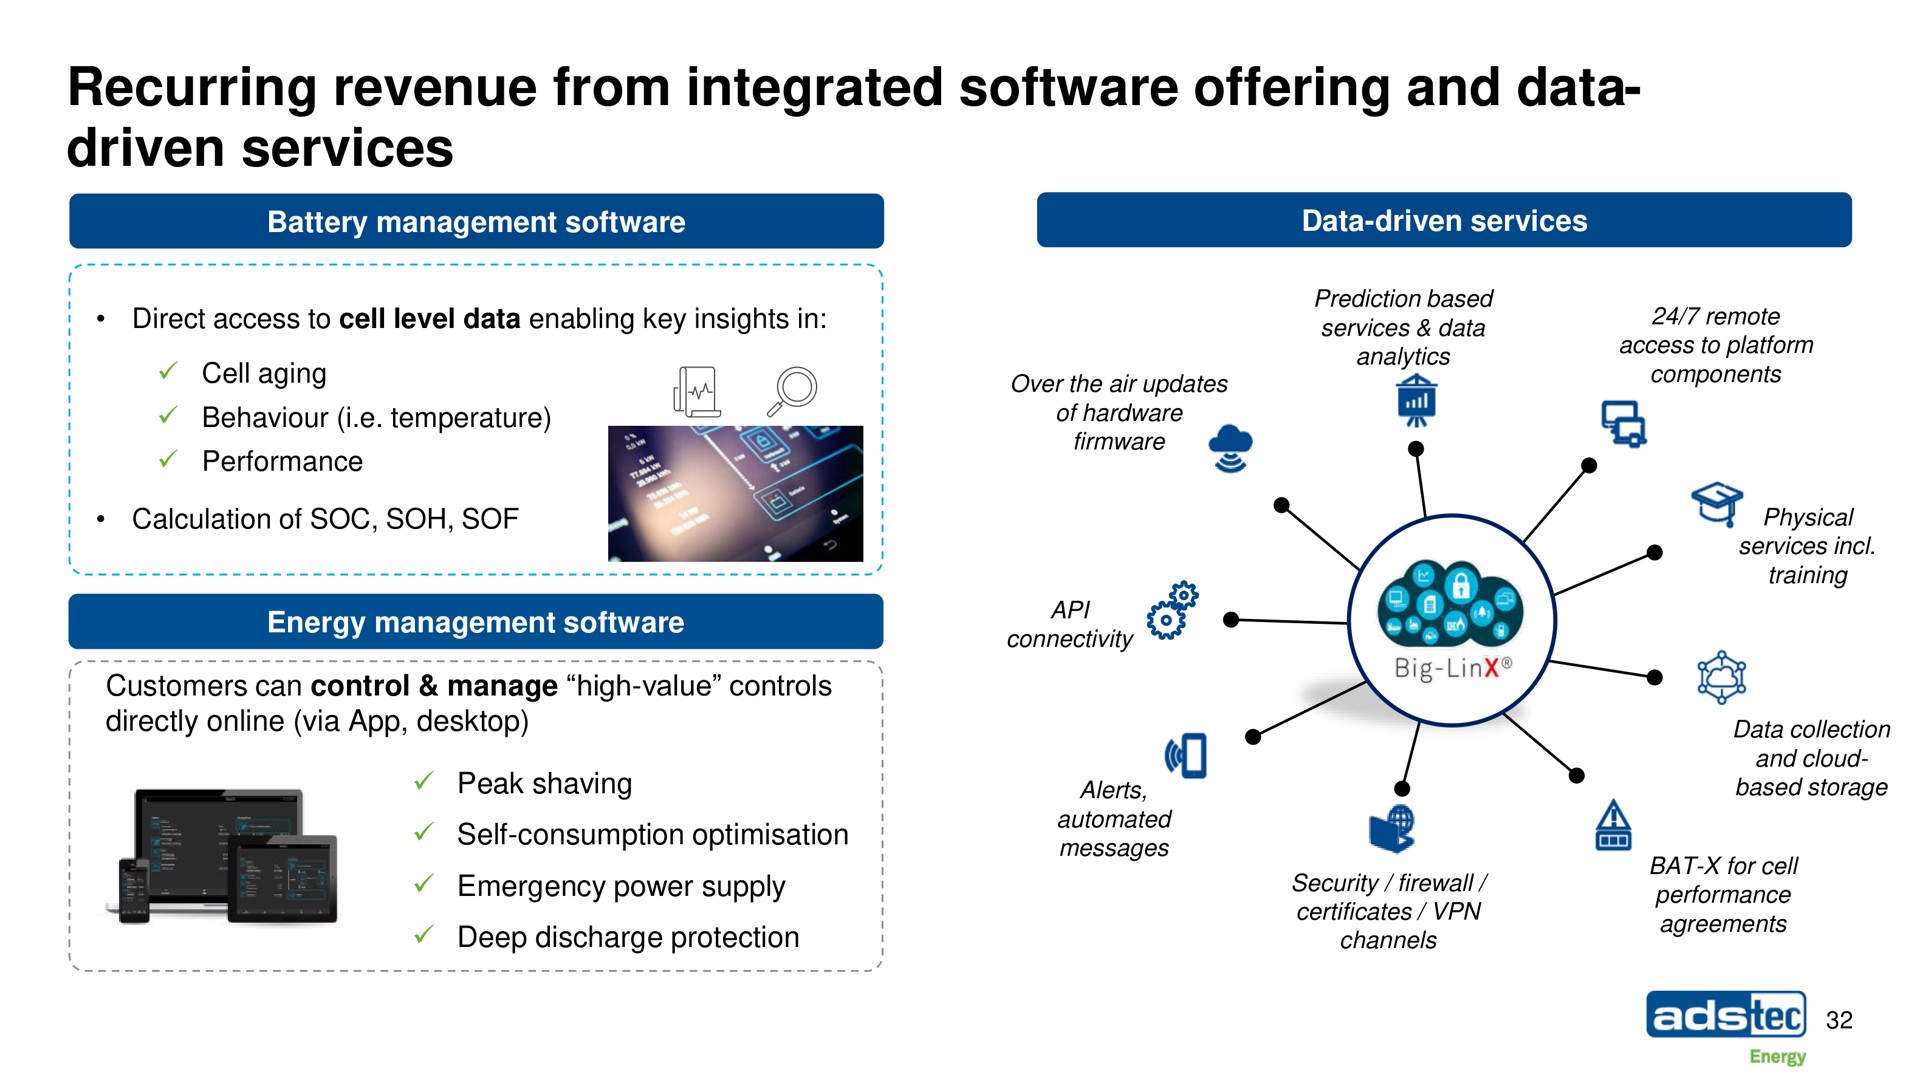 recurring revenue from integrated offering and data driven services | ads-tec Energy